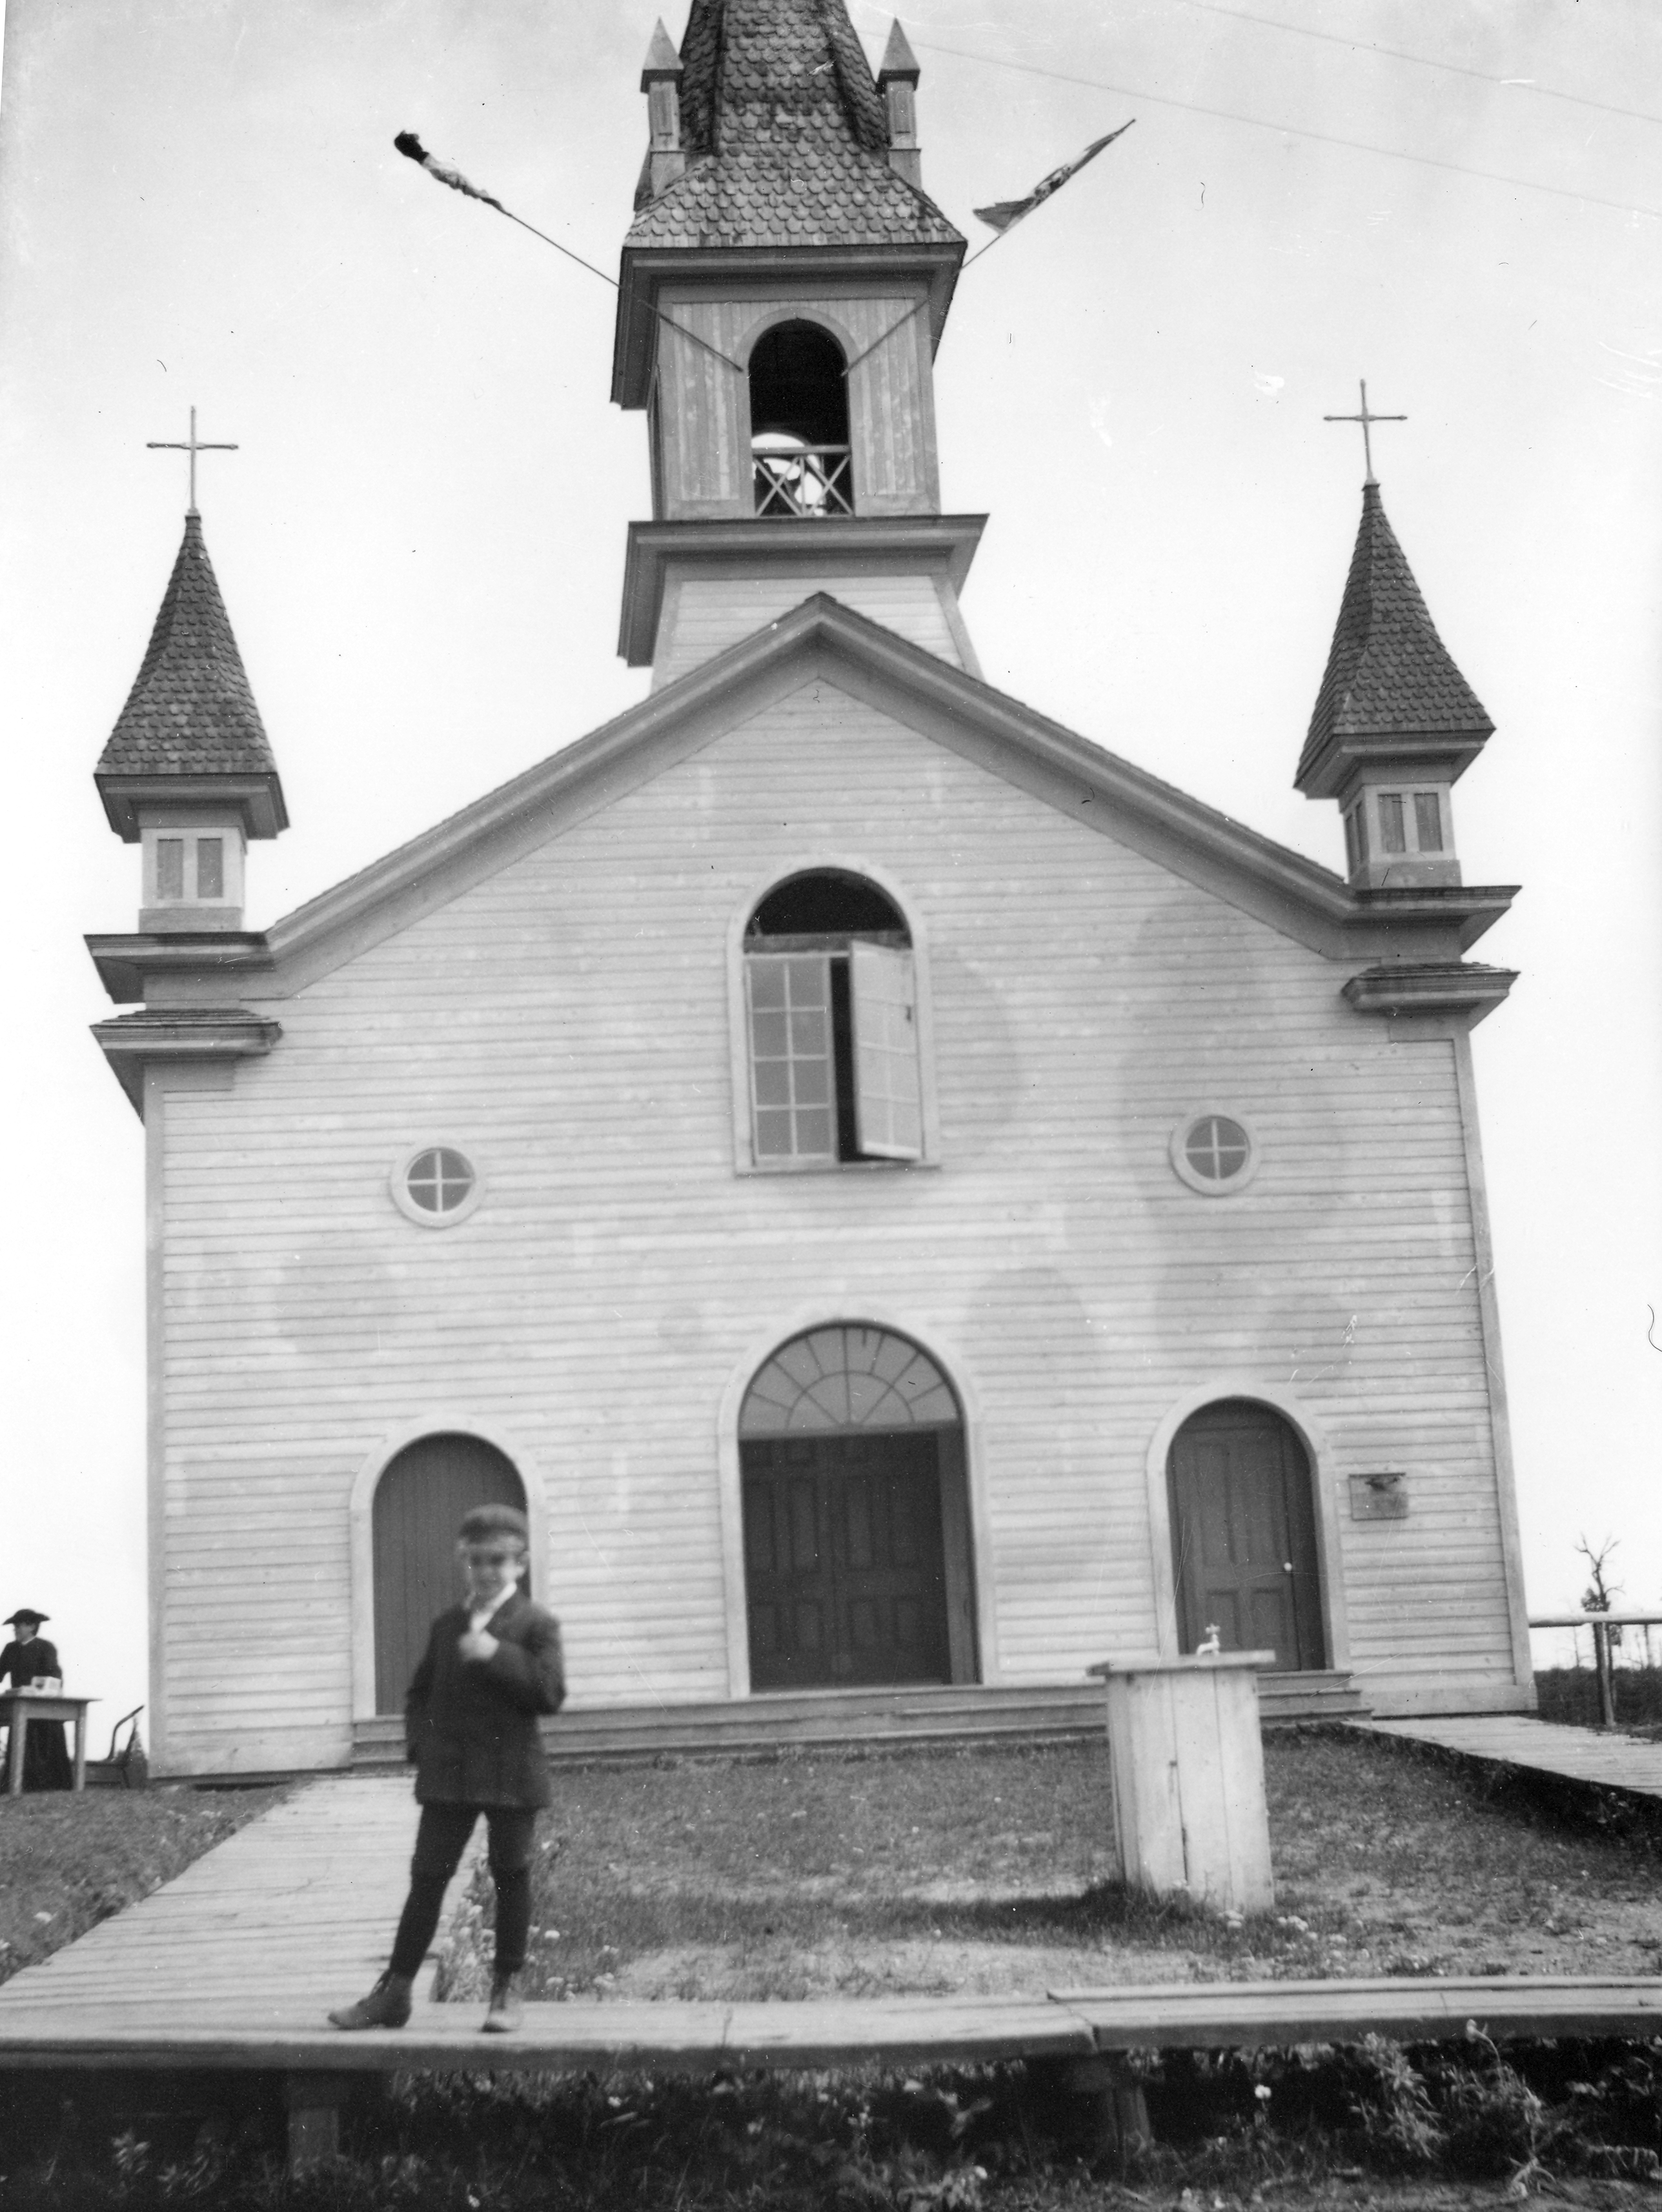 Black & white photograph of the façade of a small church. The clapboard building has three doors, three windows above the doors and a belfry. A boy stands on a boardwalk outside the church.